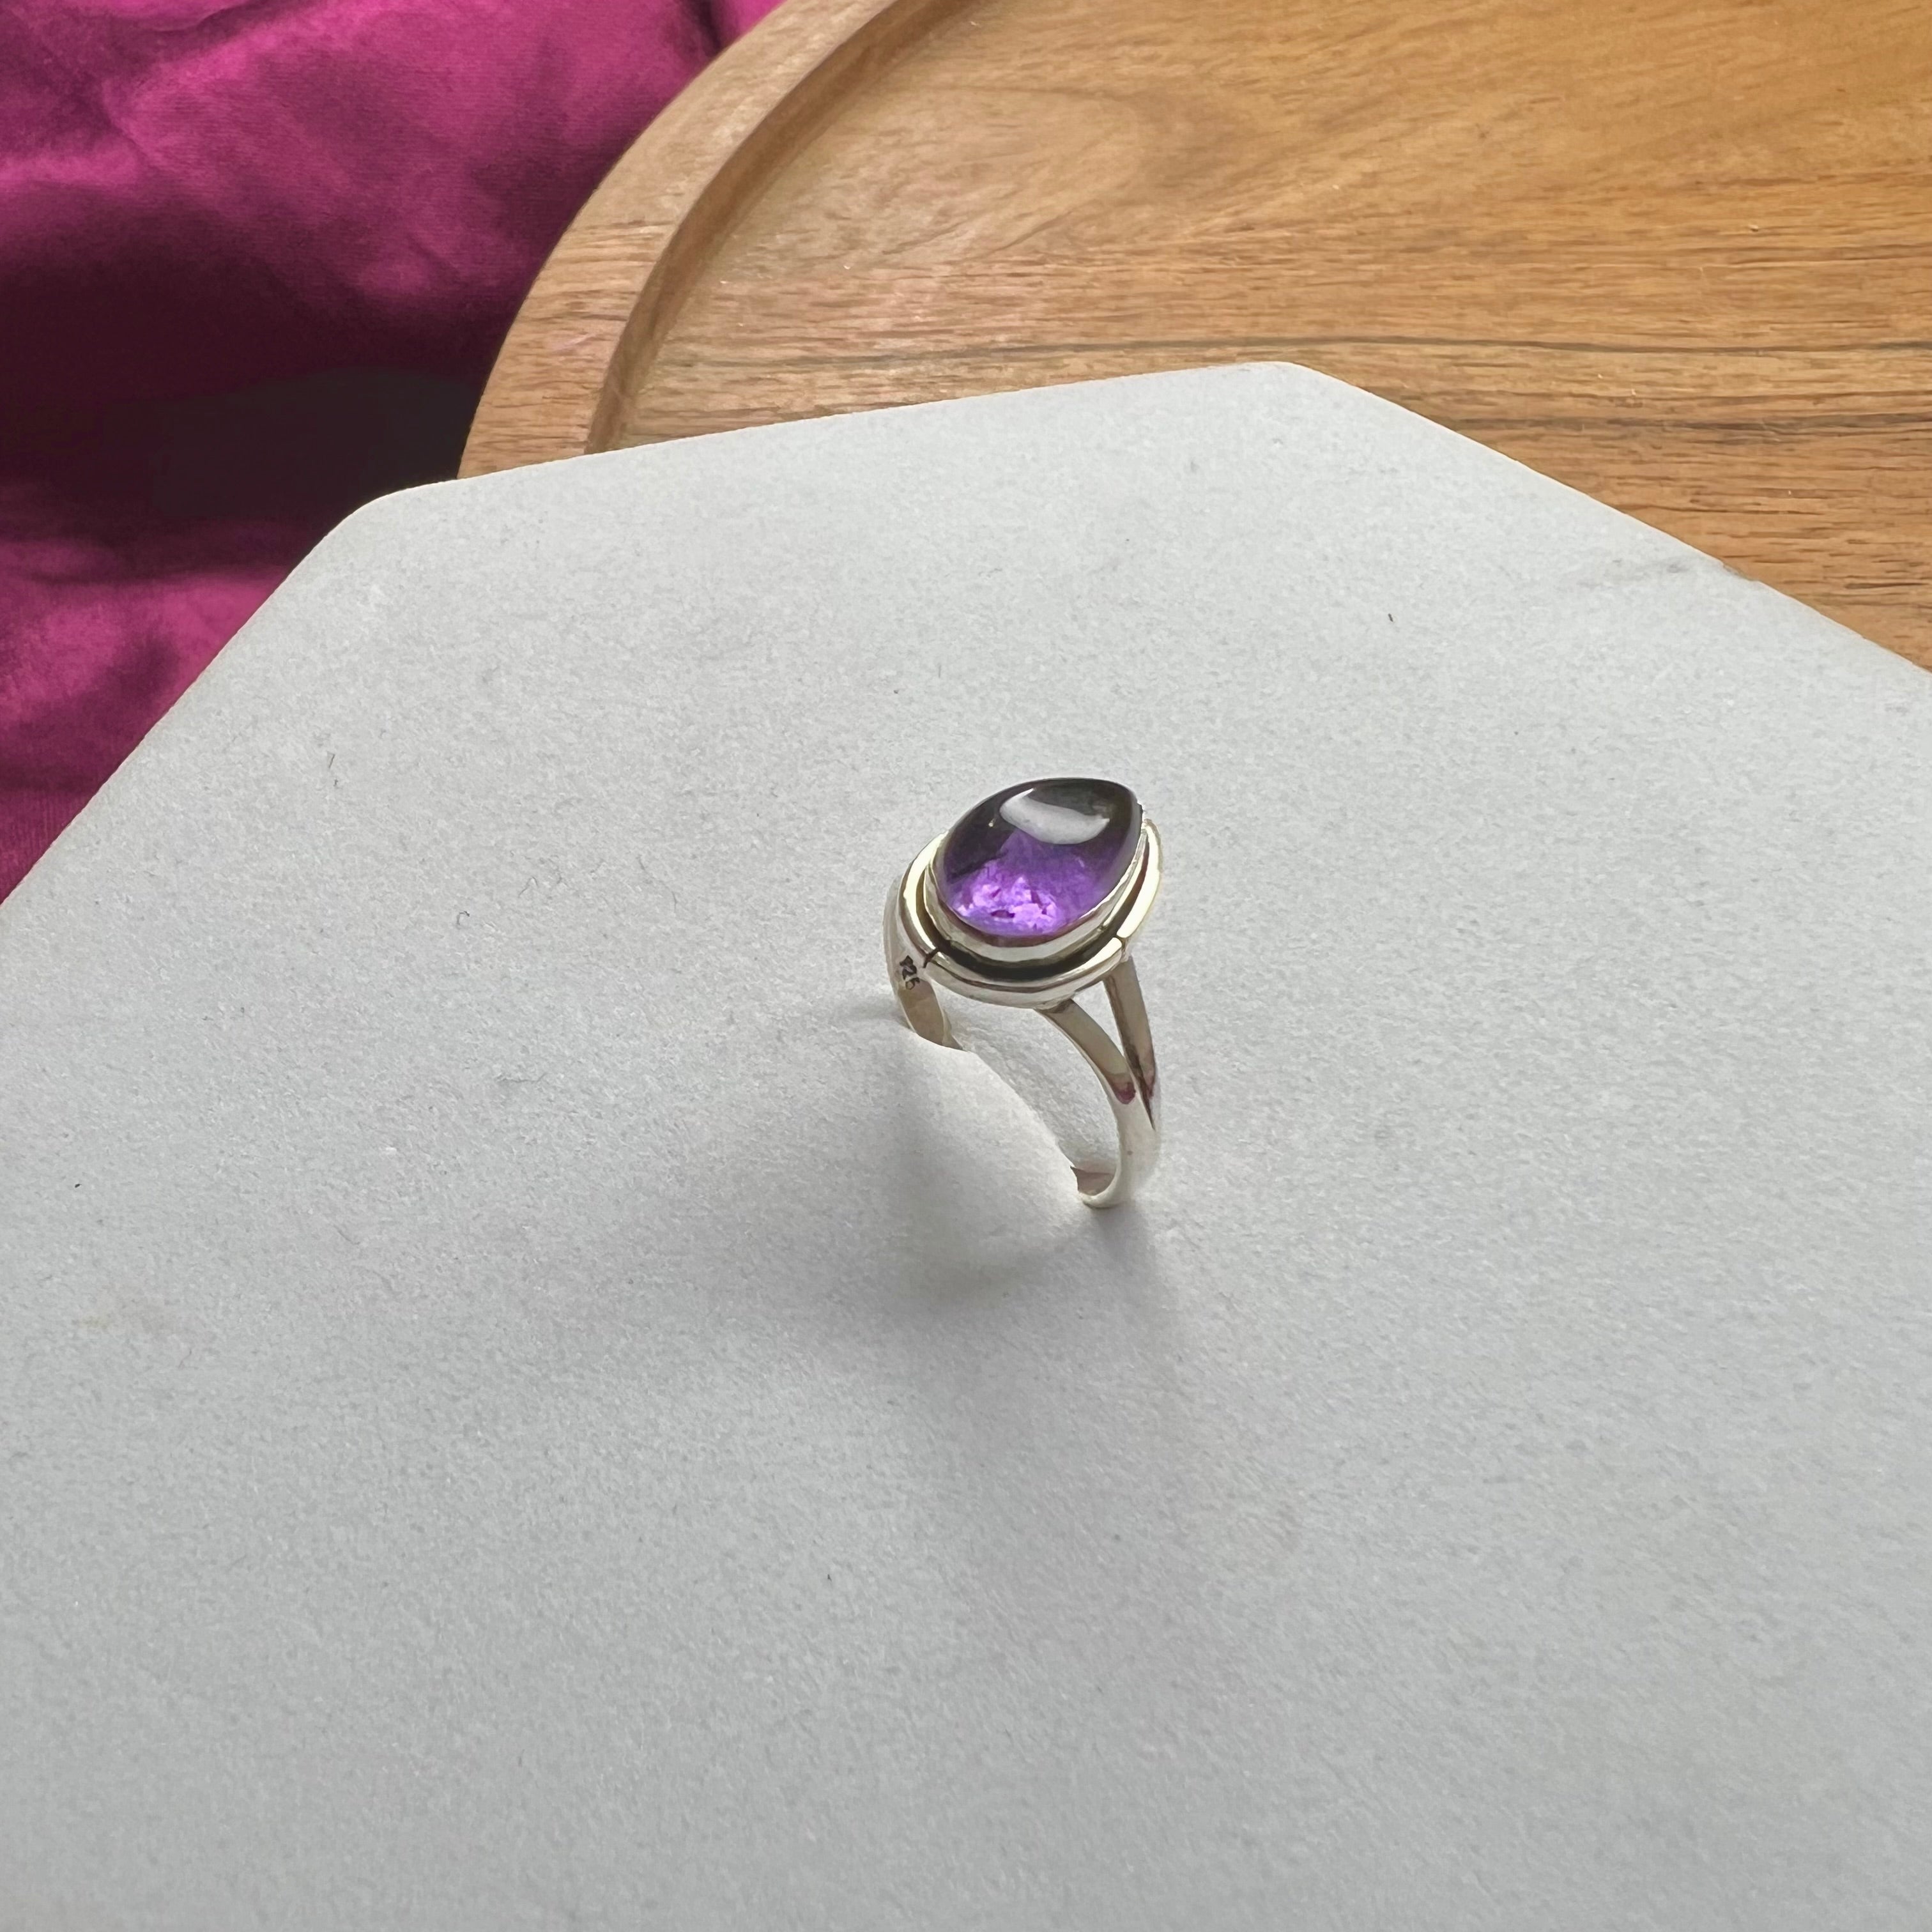 HANDCRAFTED AMETHYST RING- SILVER 925